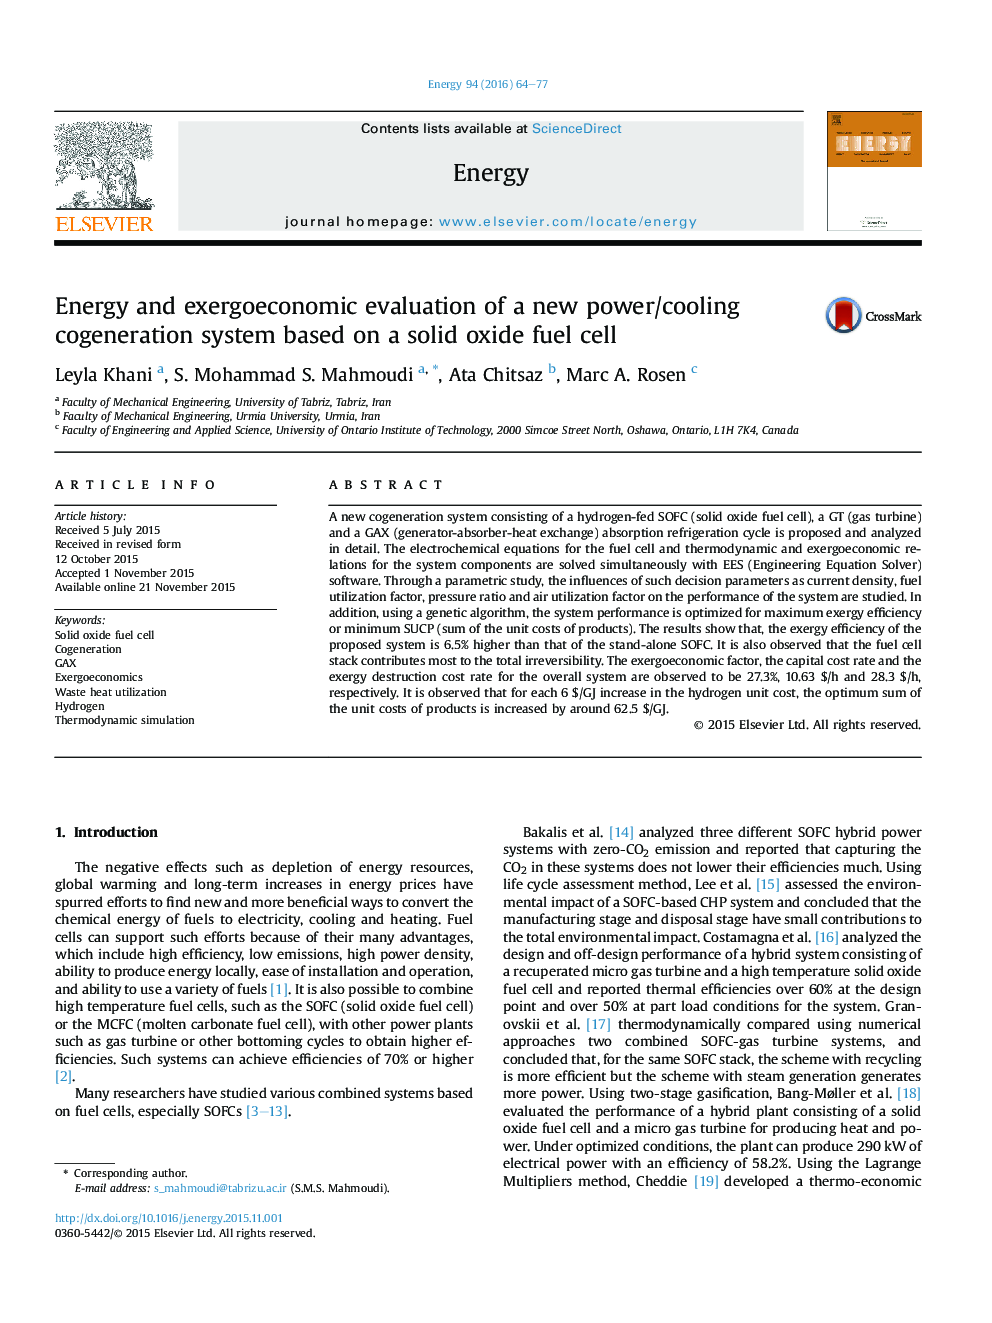 Energy and exergoeconomic evaluation of a new power/cooling cogeneration system based on a solid oxide fuel cell